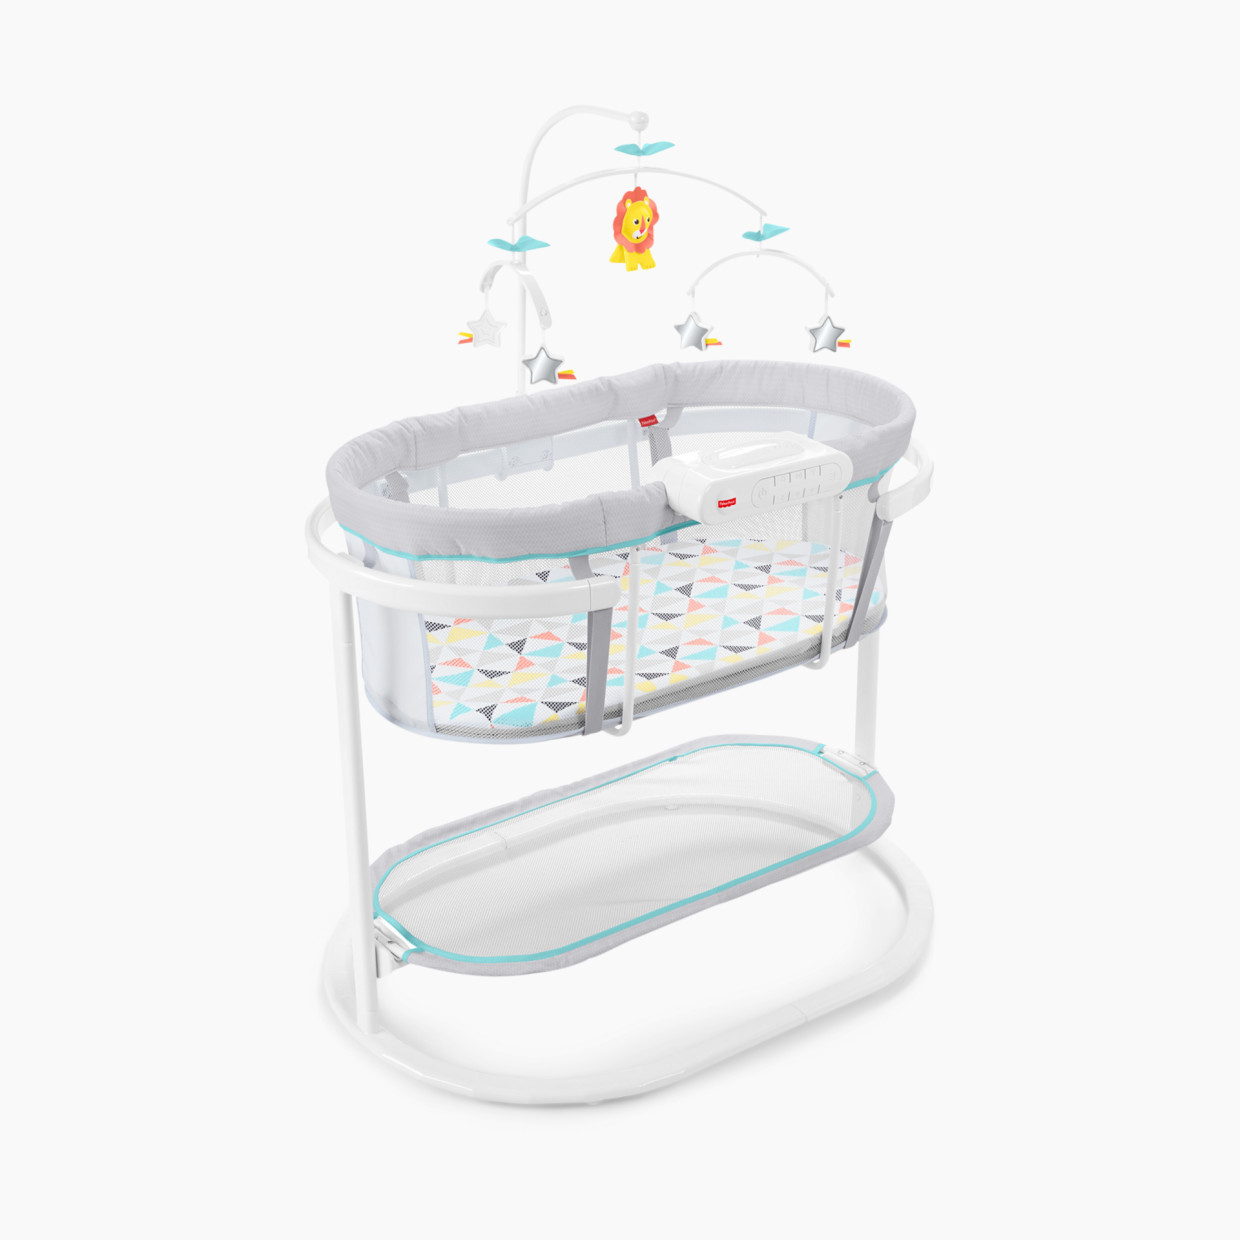 Fisher-Price Soothing Motions Bassinet - Windmill.